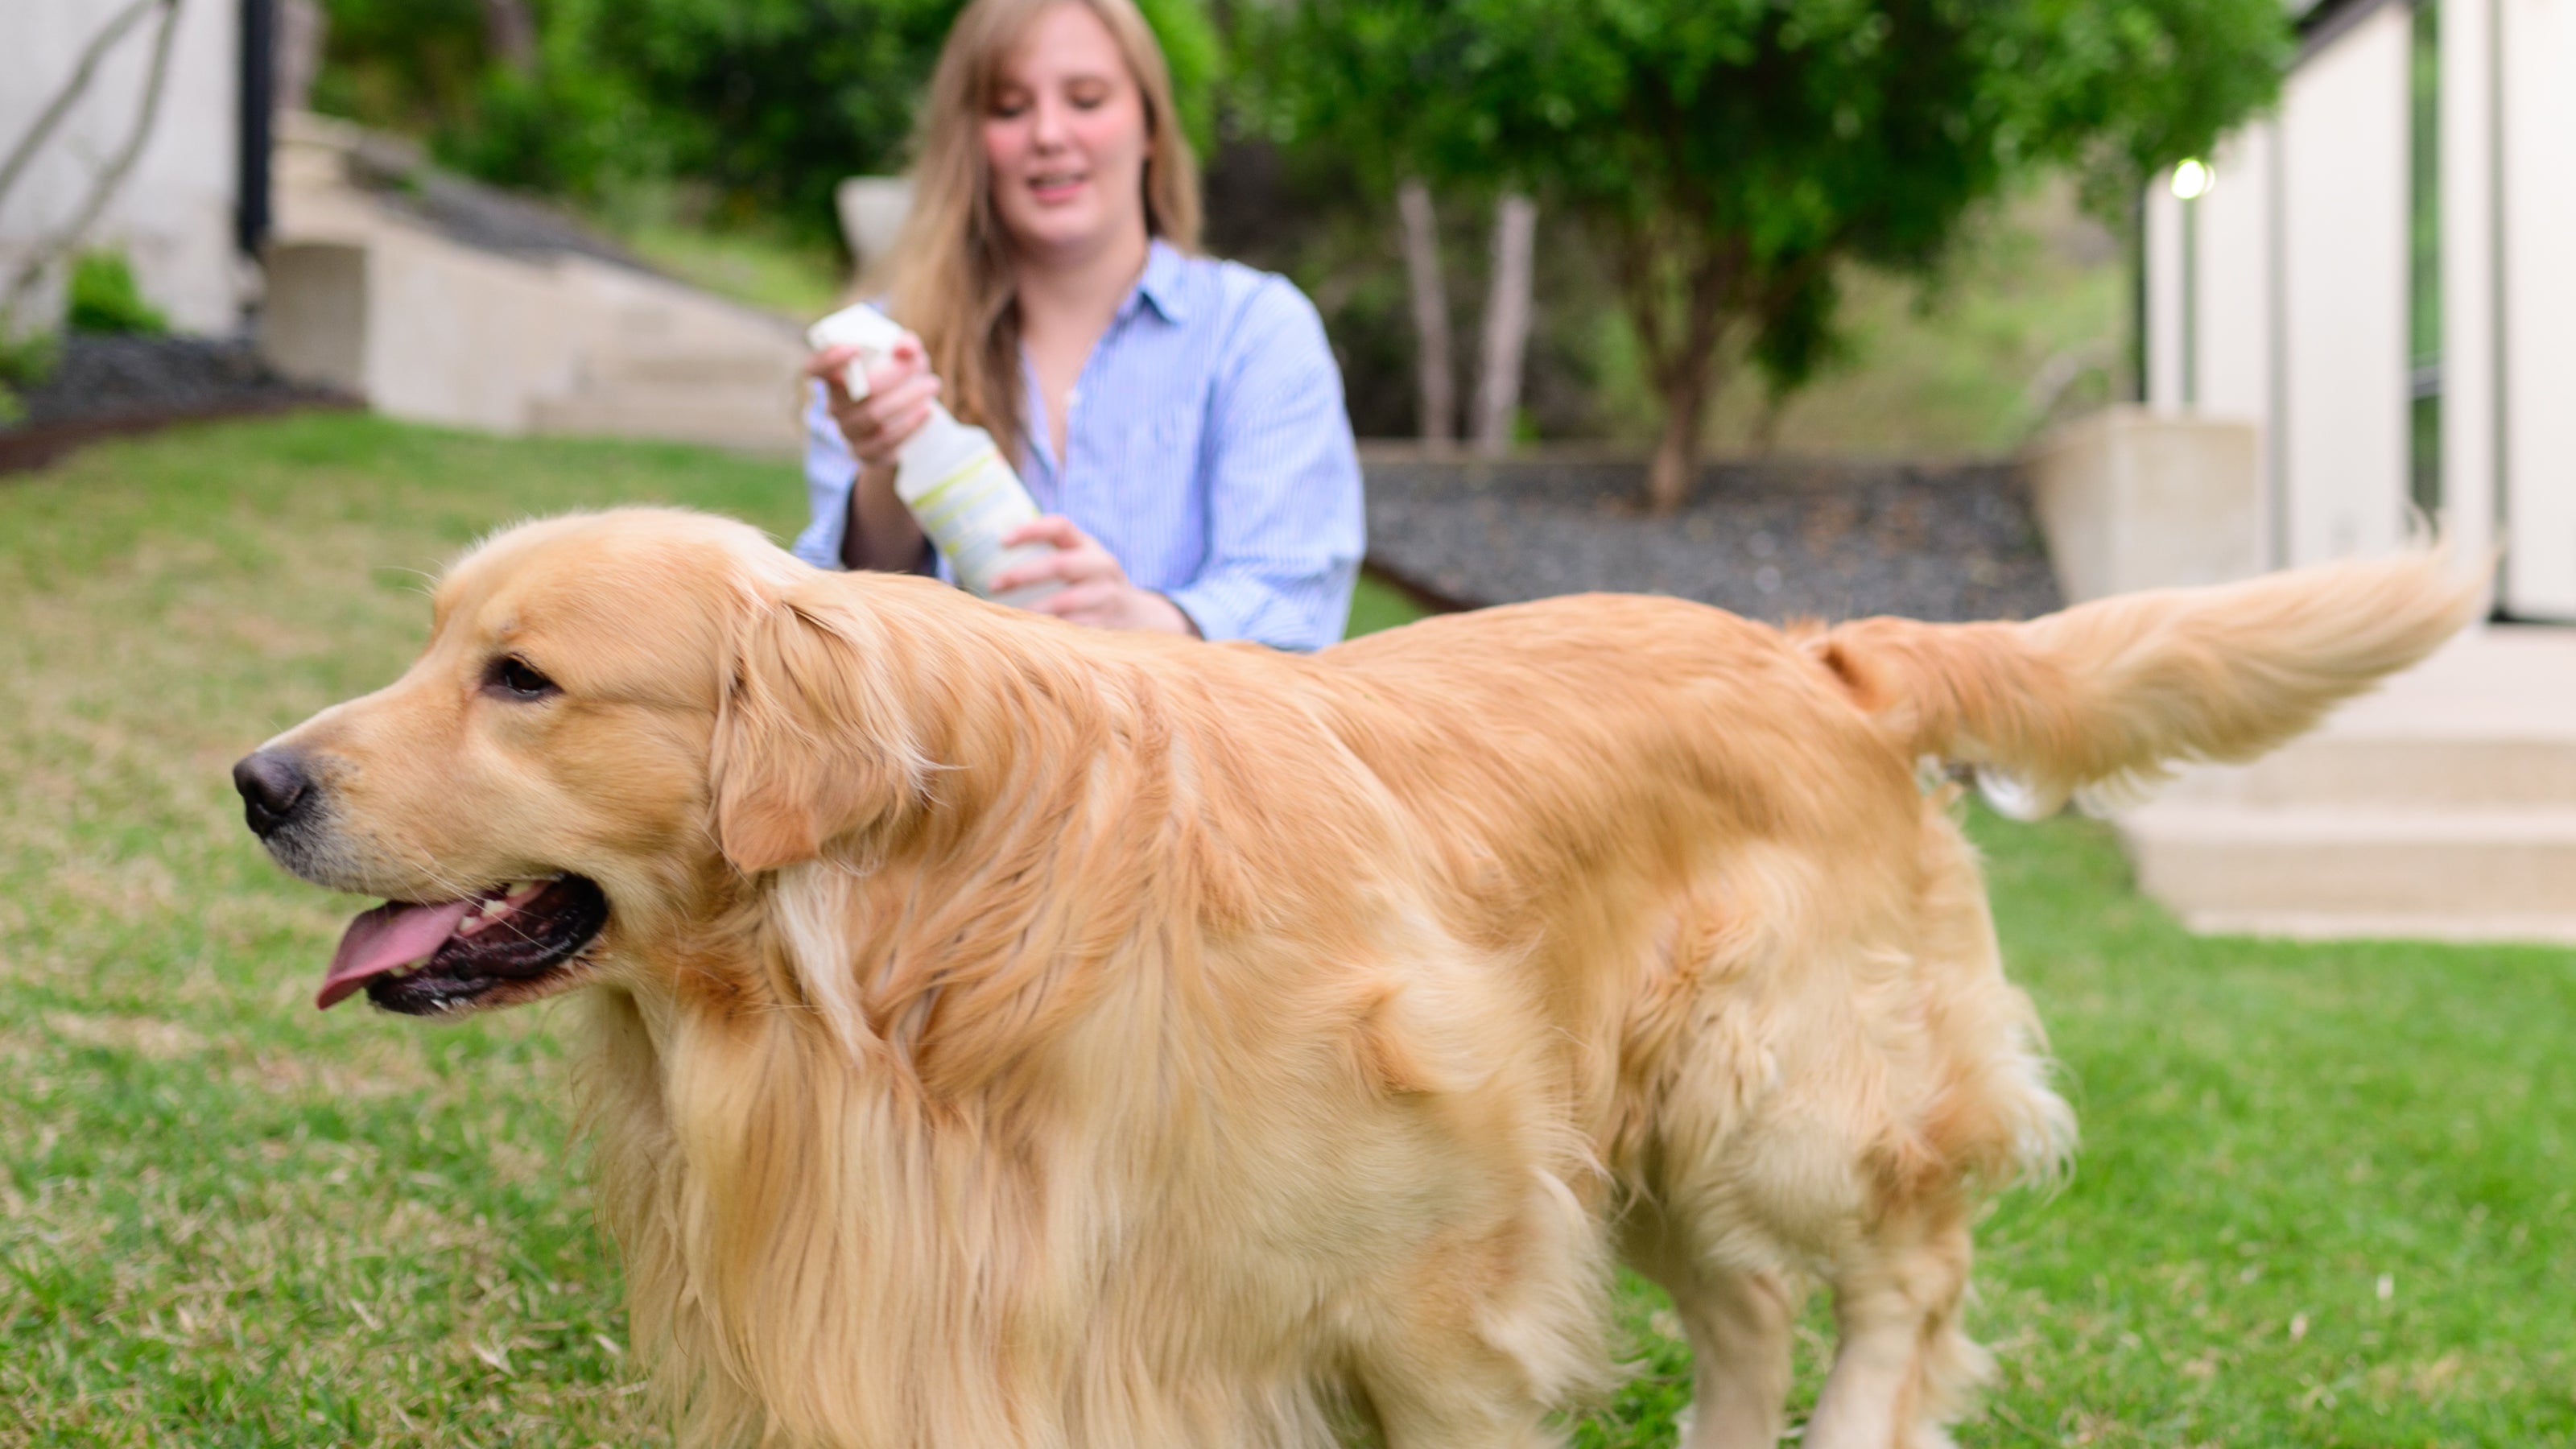 A golden retreiver in a yard with a woman in a blue shirt holding Wondercide Flea & Tick spray for pets and home